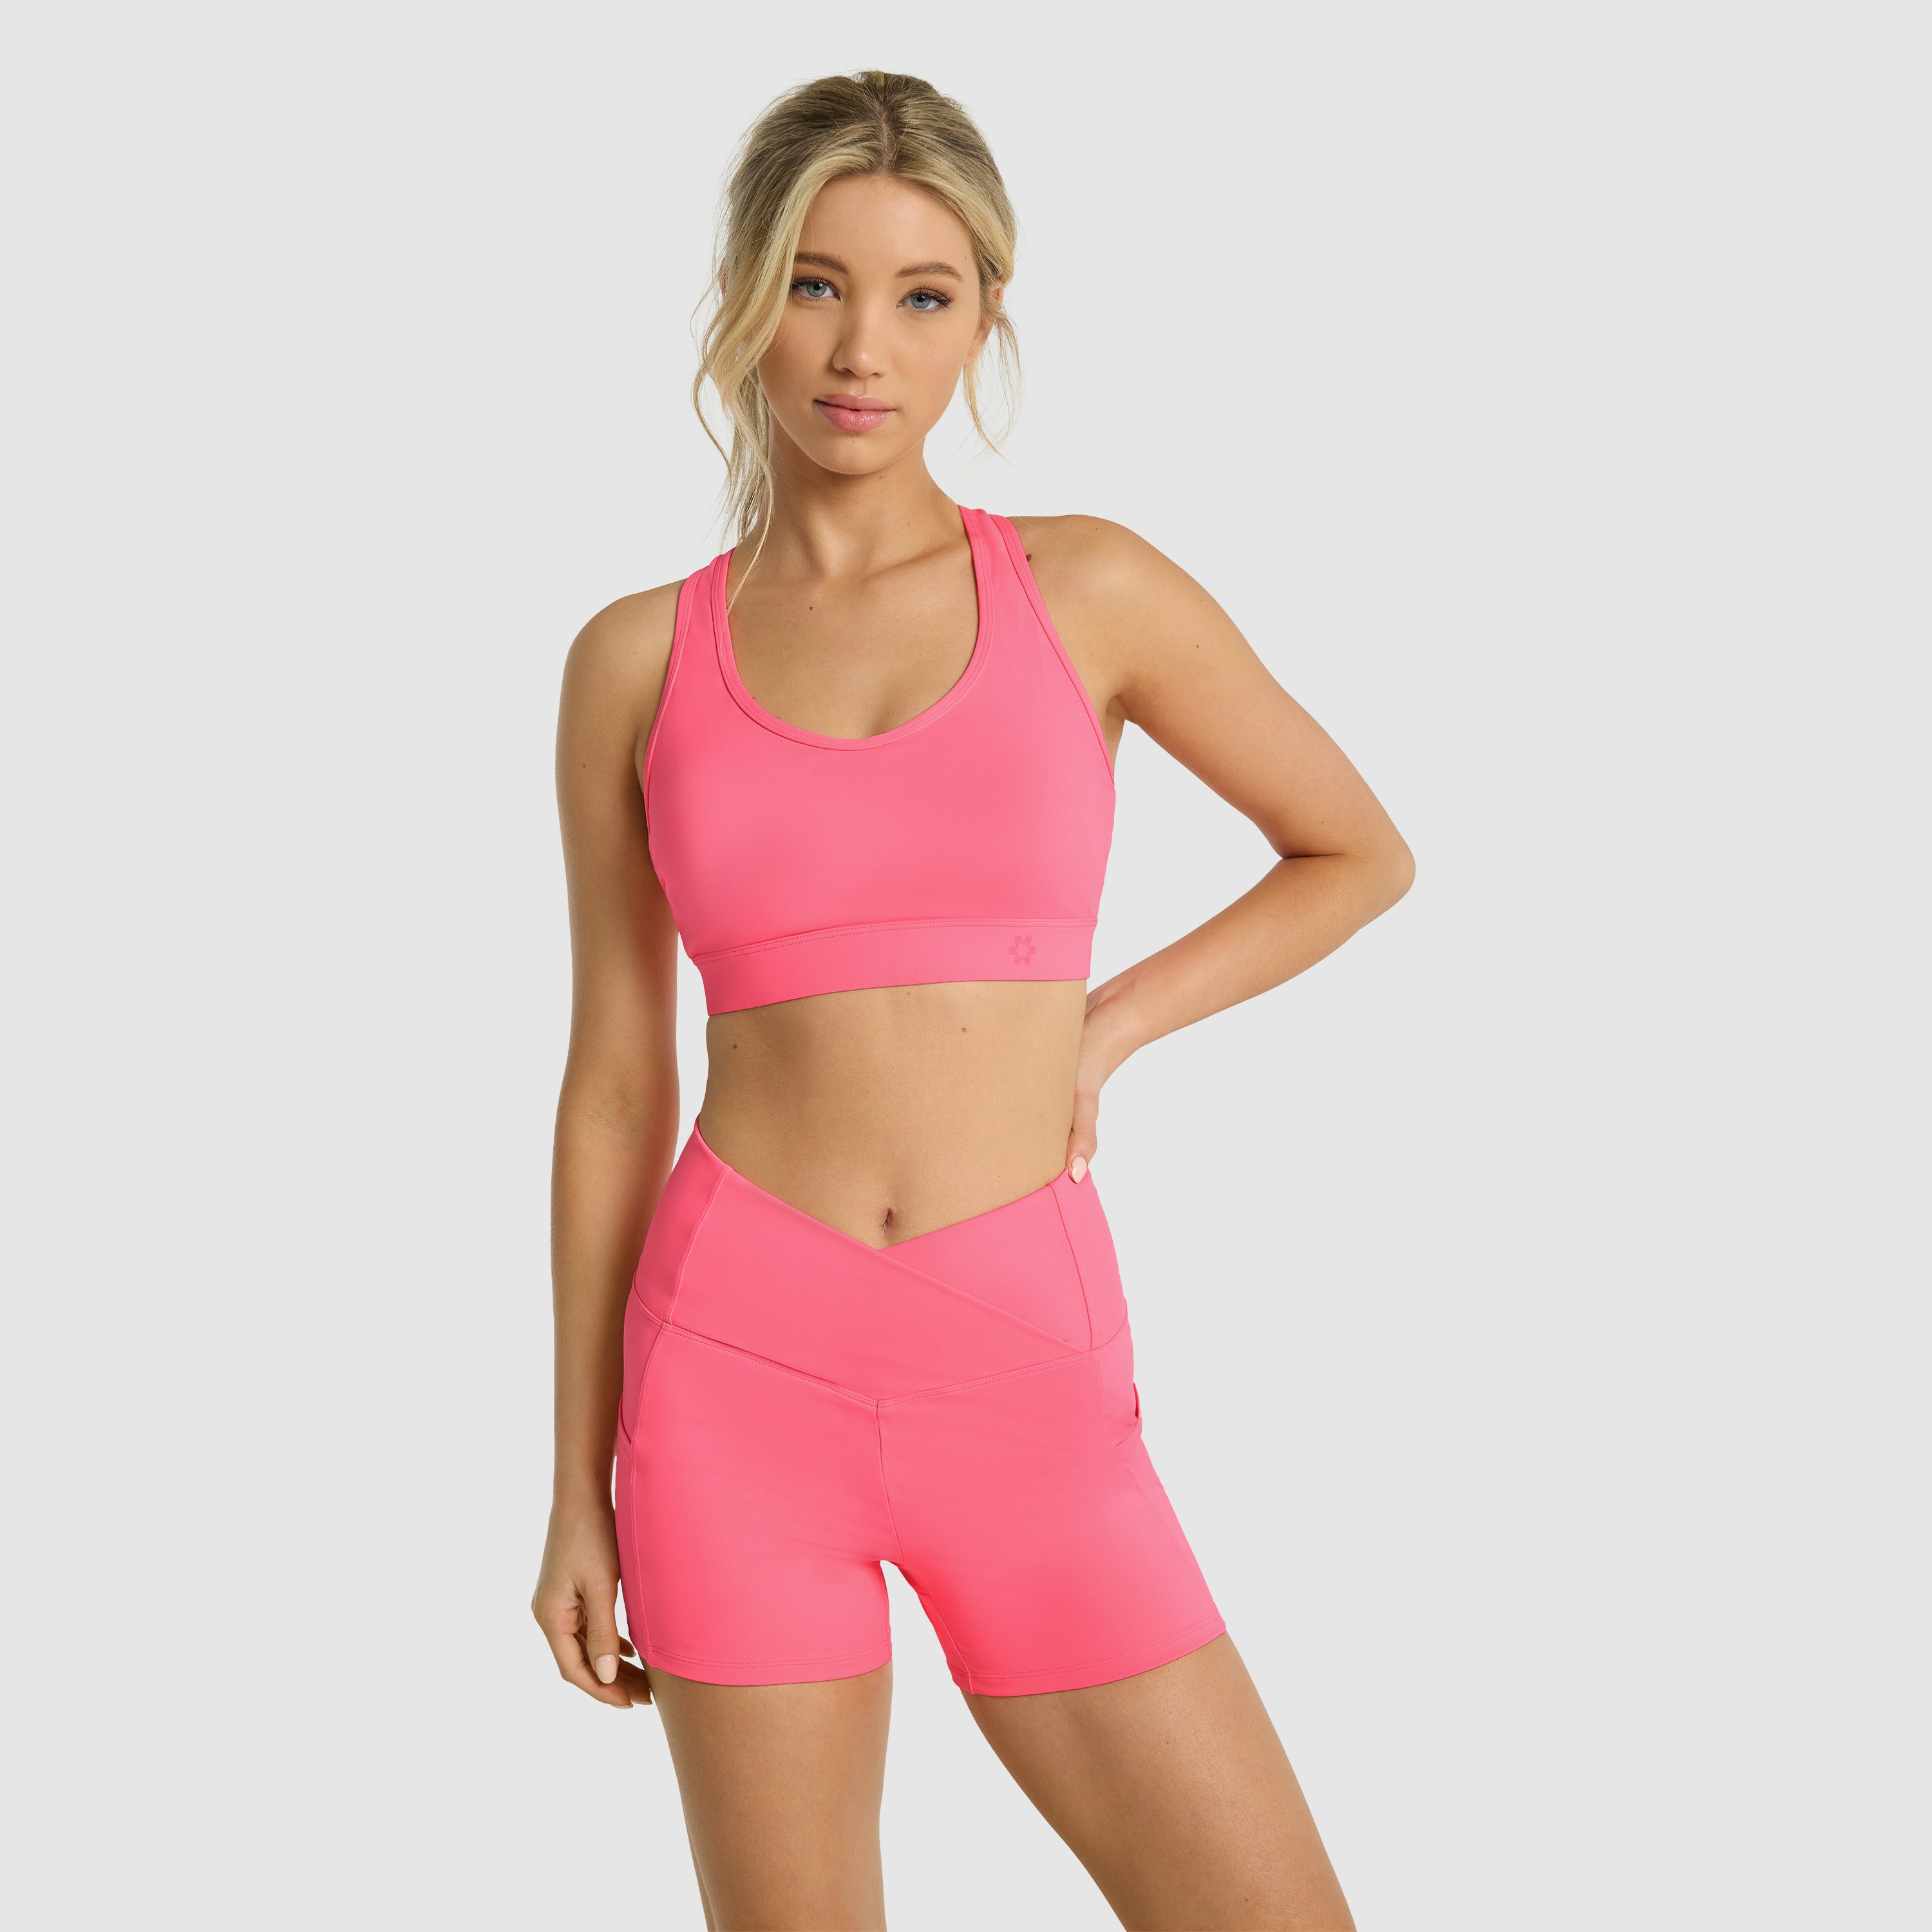 Brand New Rockwear Womens Size S High Impact Sports Bra in Coral Colour (s)